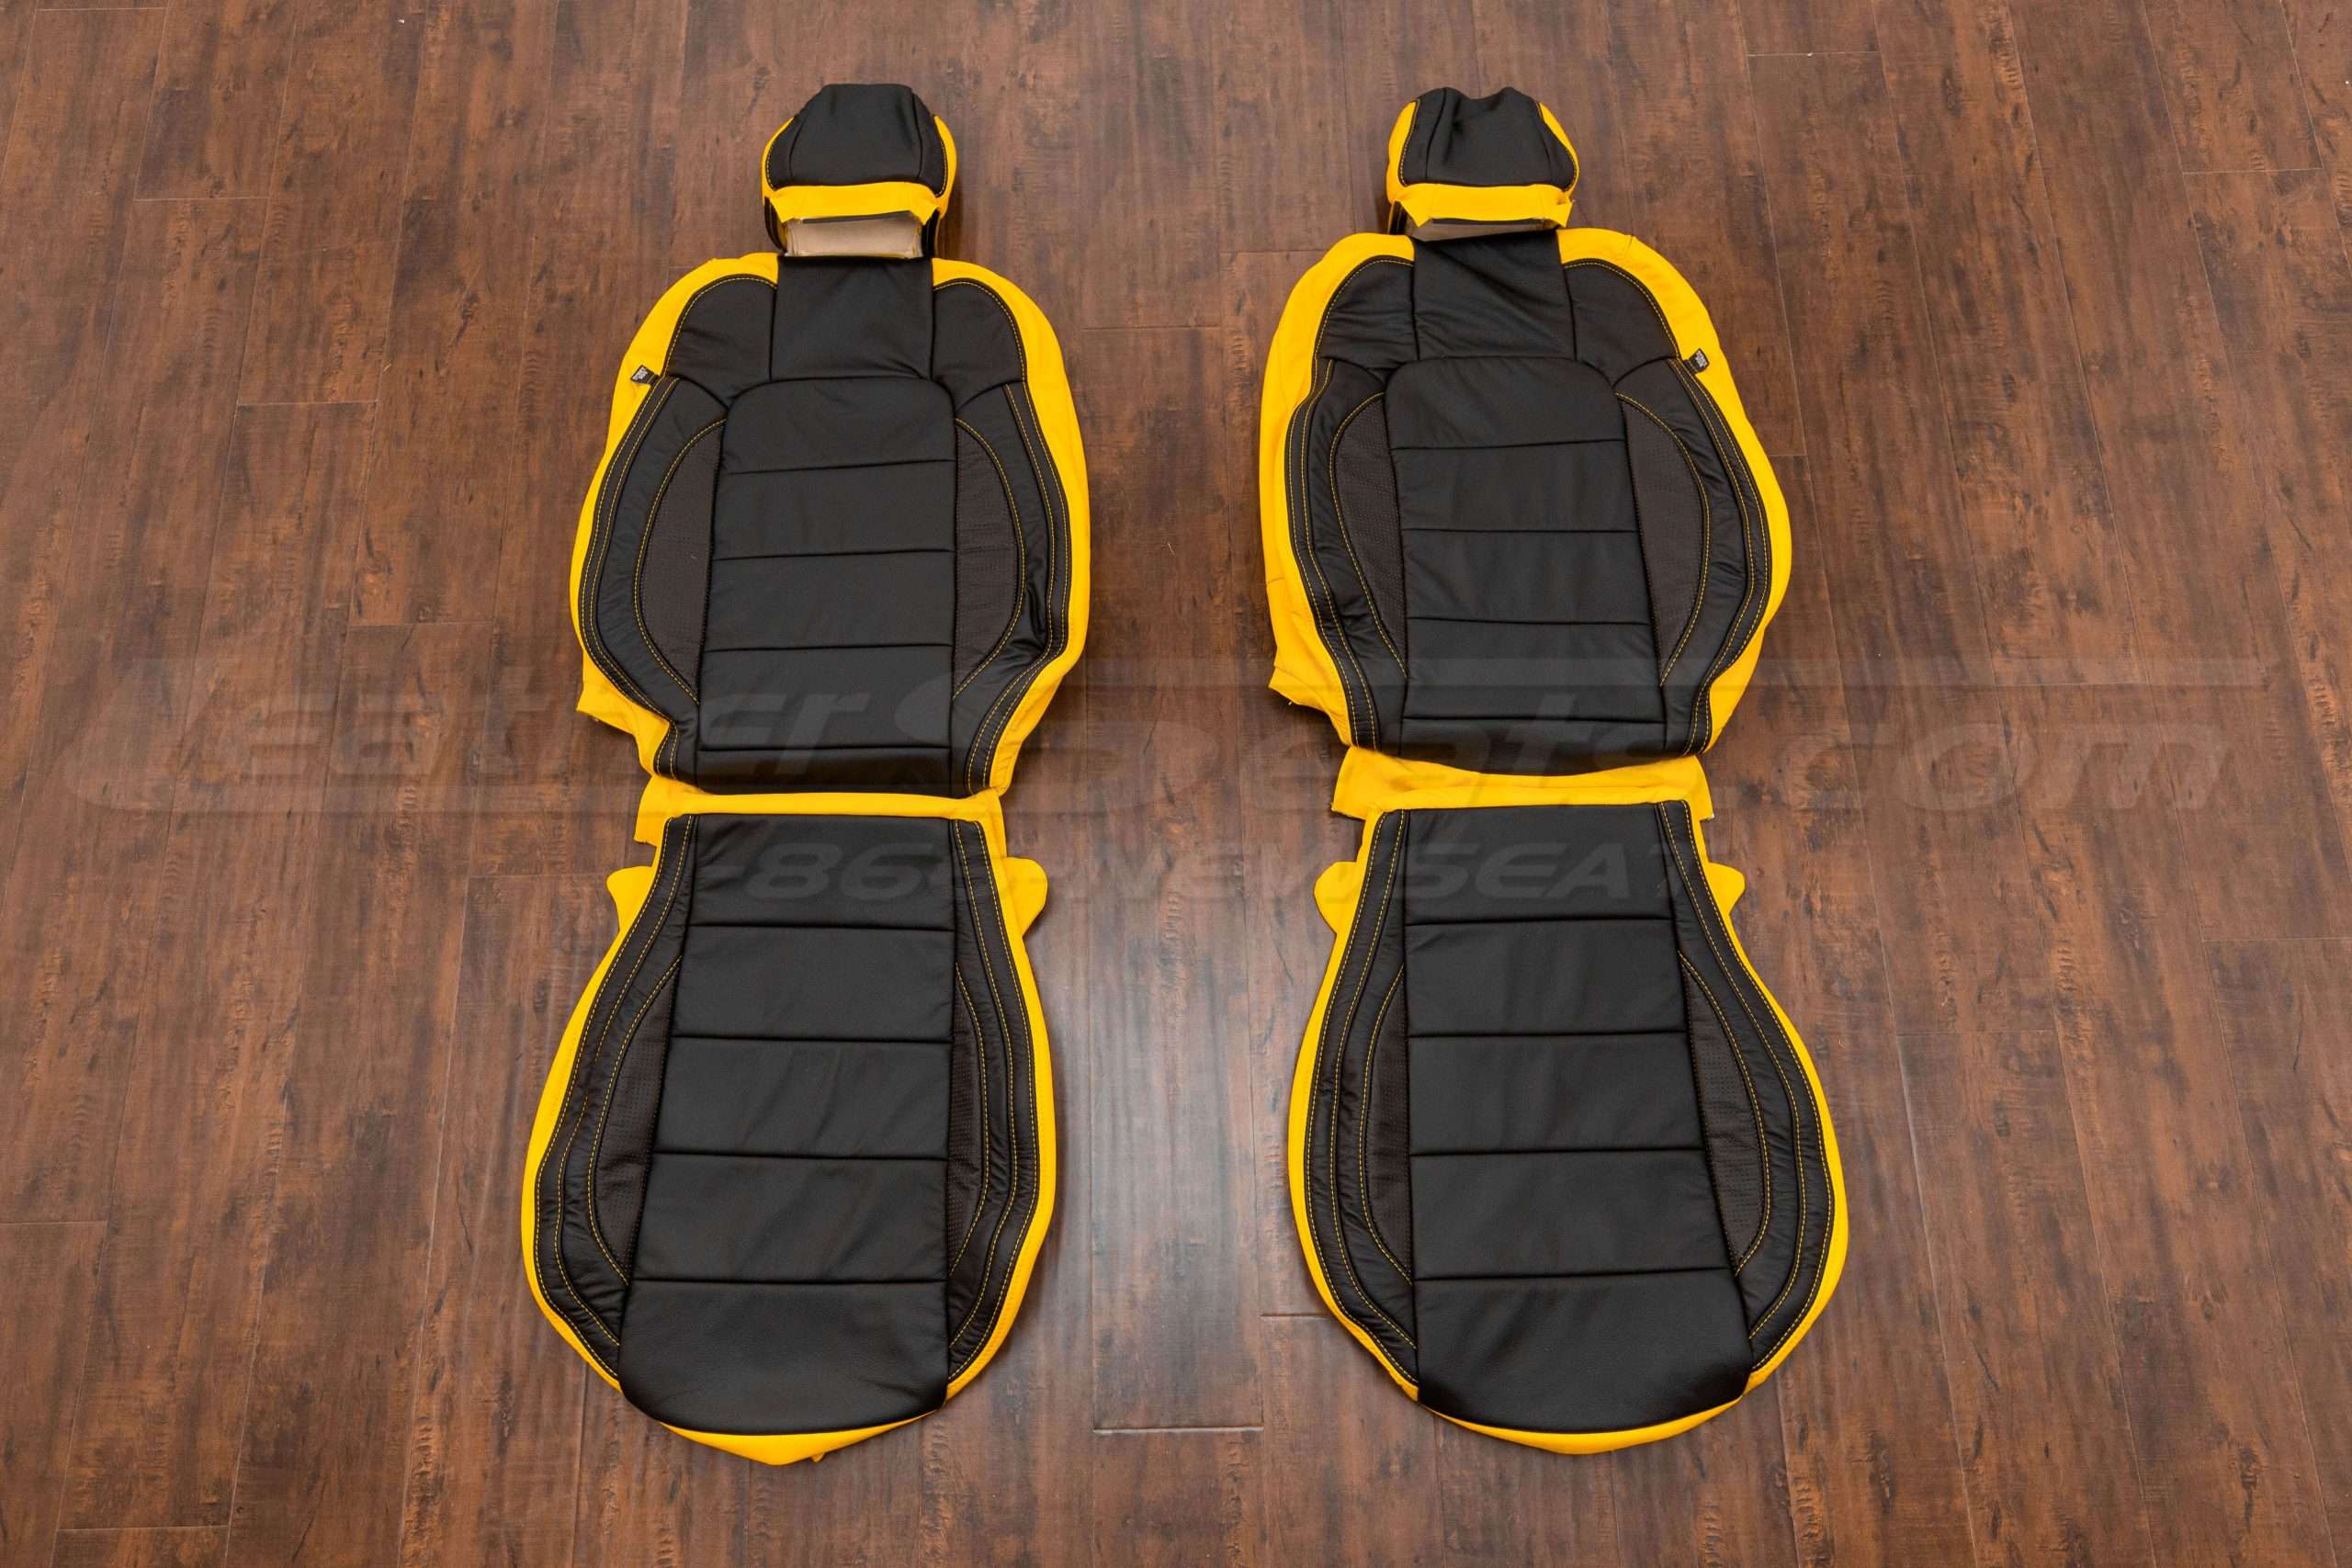 2015-2021 Ford Mustang Coupe Leather Seat Kit - Black & Velocity Yellow - Front seat upholstery